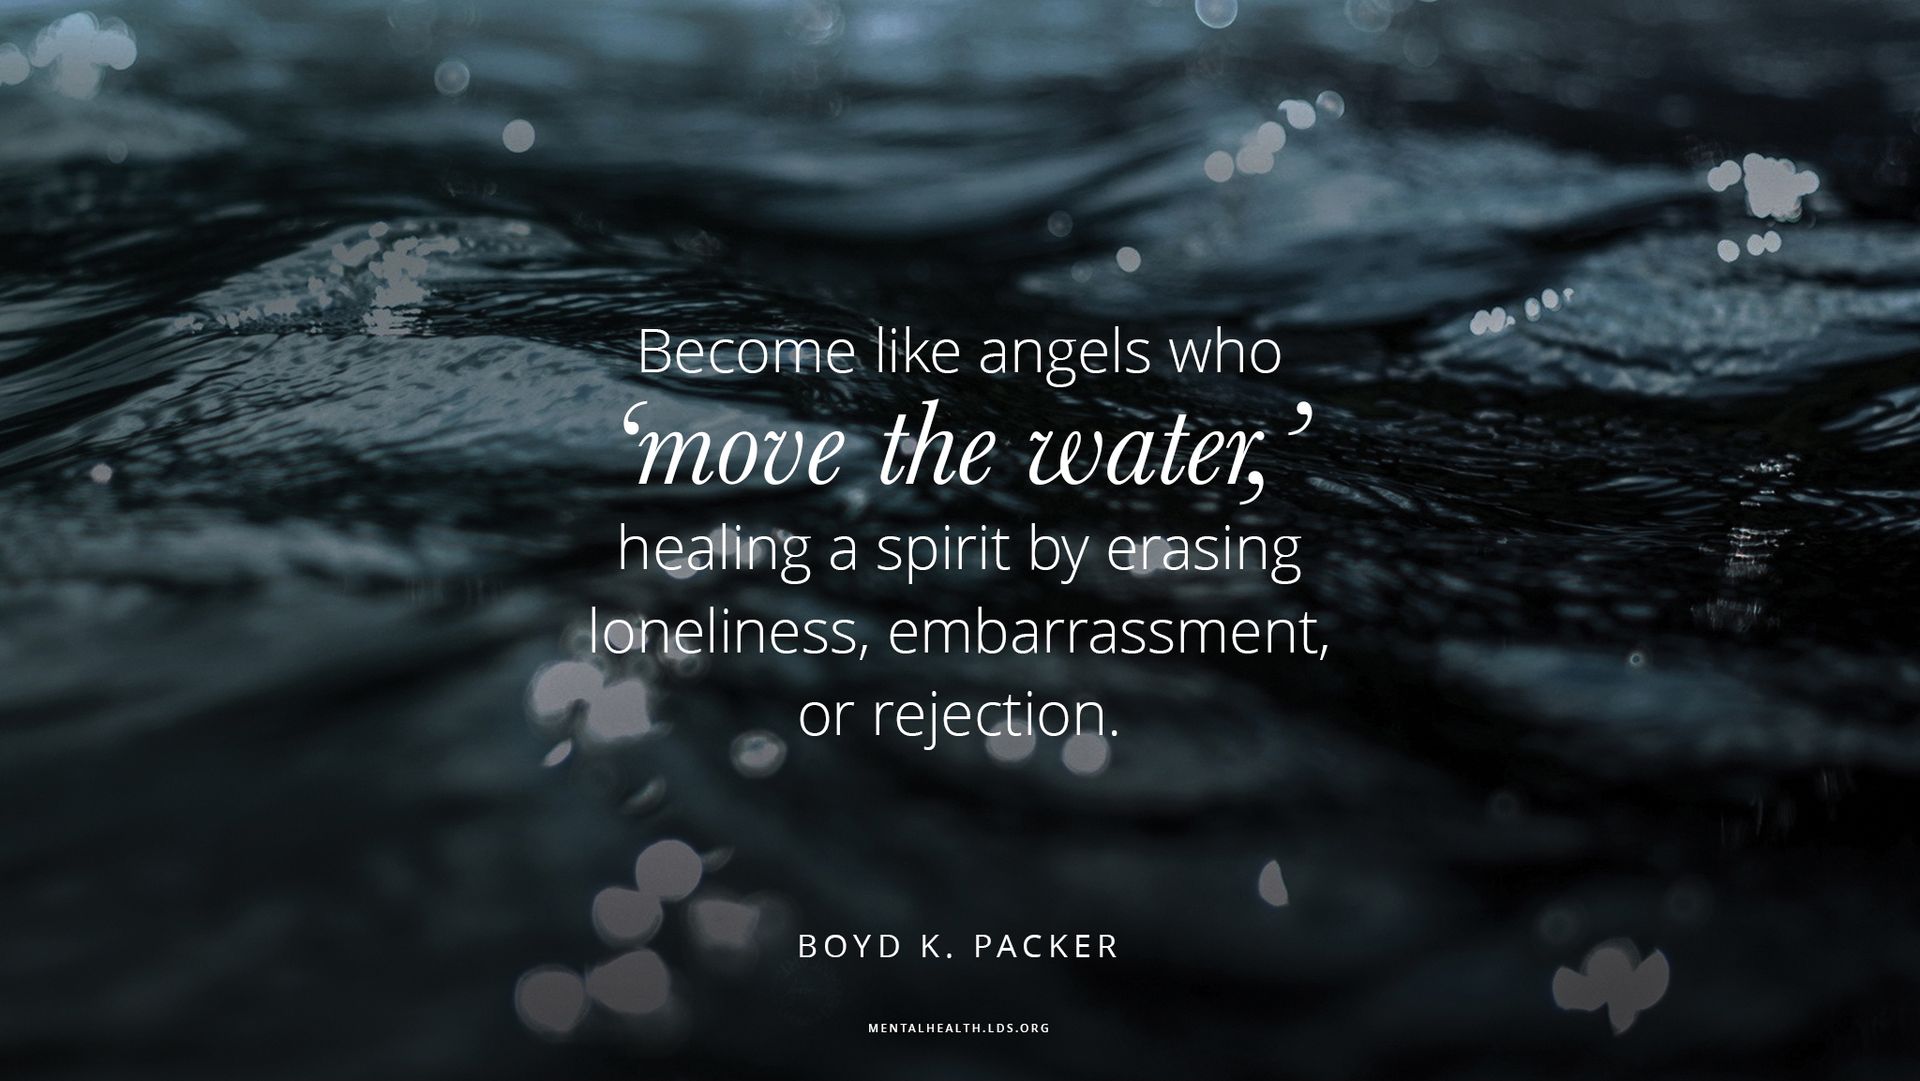 “Become like angels who 'move the water,' healing a spirit by erasing loneliness, embarrassment, or rejection.”—Elder Boyd K. Packer, “The Moving of the Water”